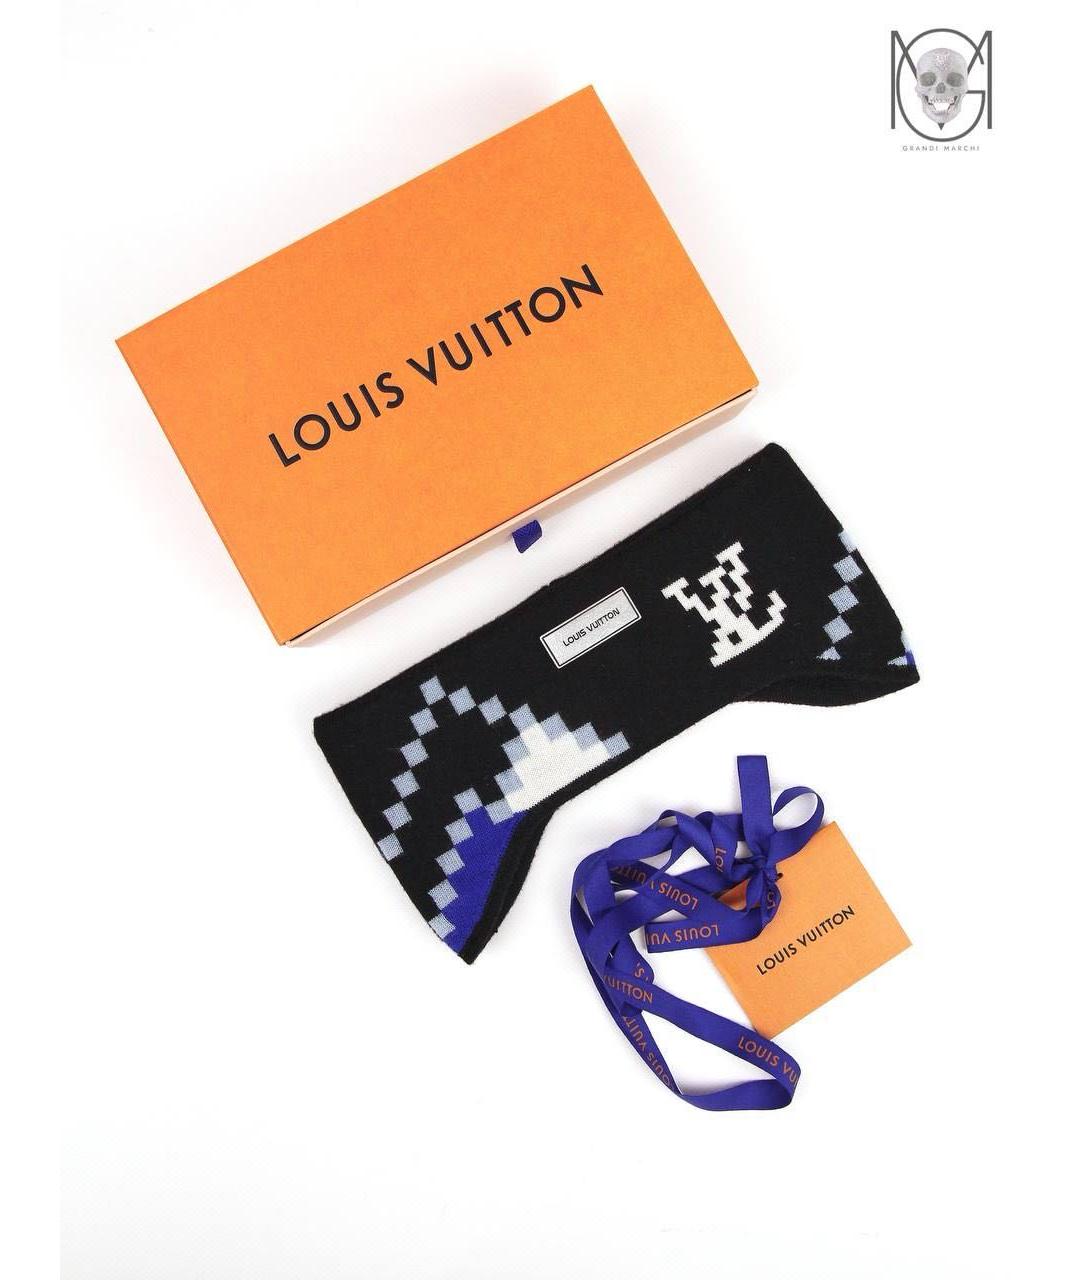 LOUIS VUITTON PRE-OWNED Шерстяная кепка/бейсболка, фото 4